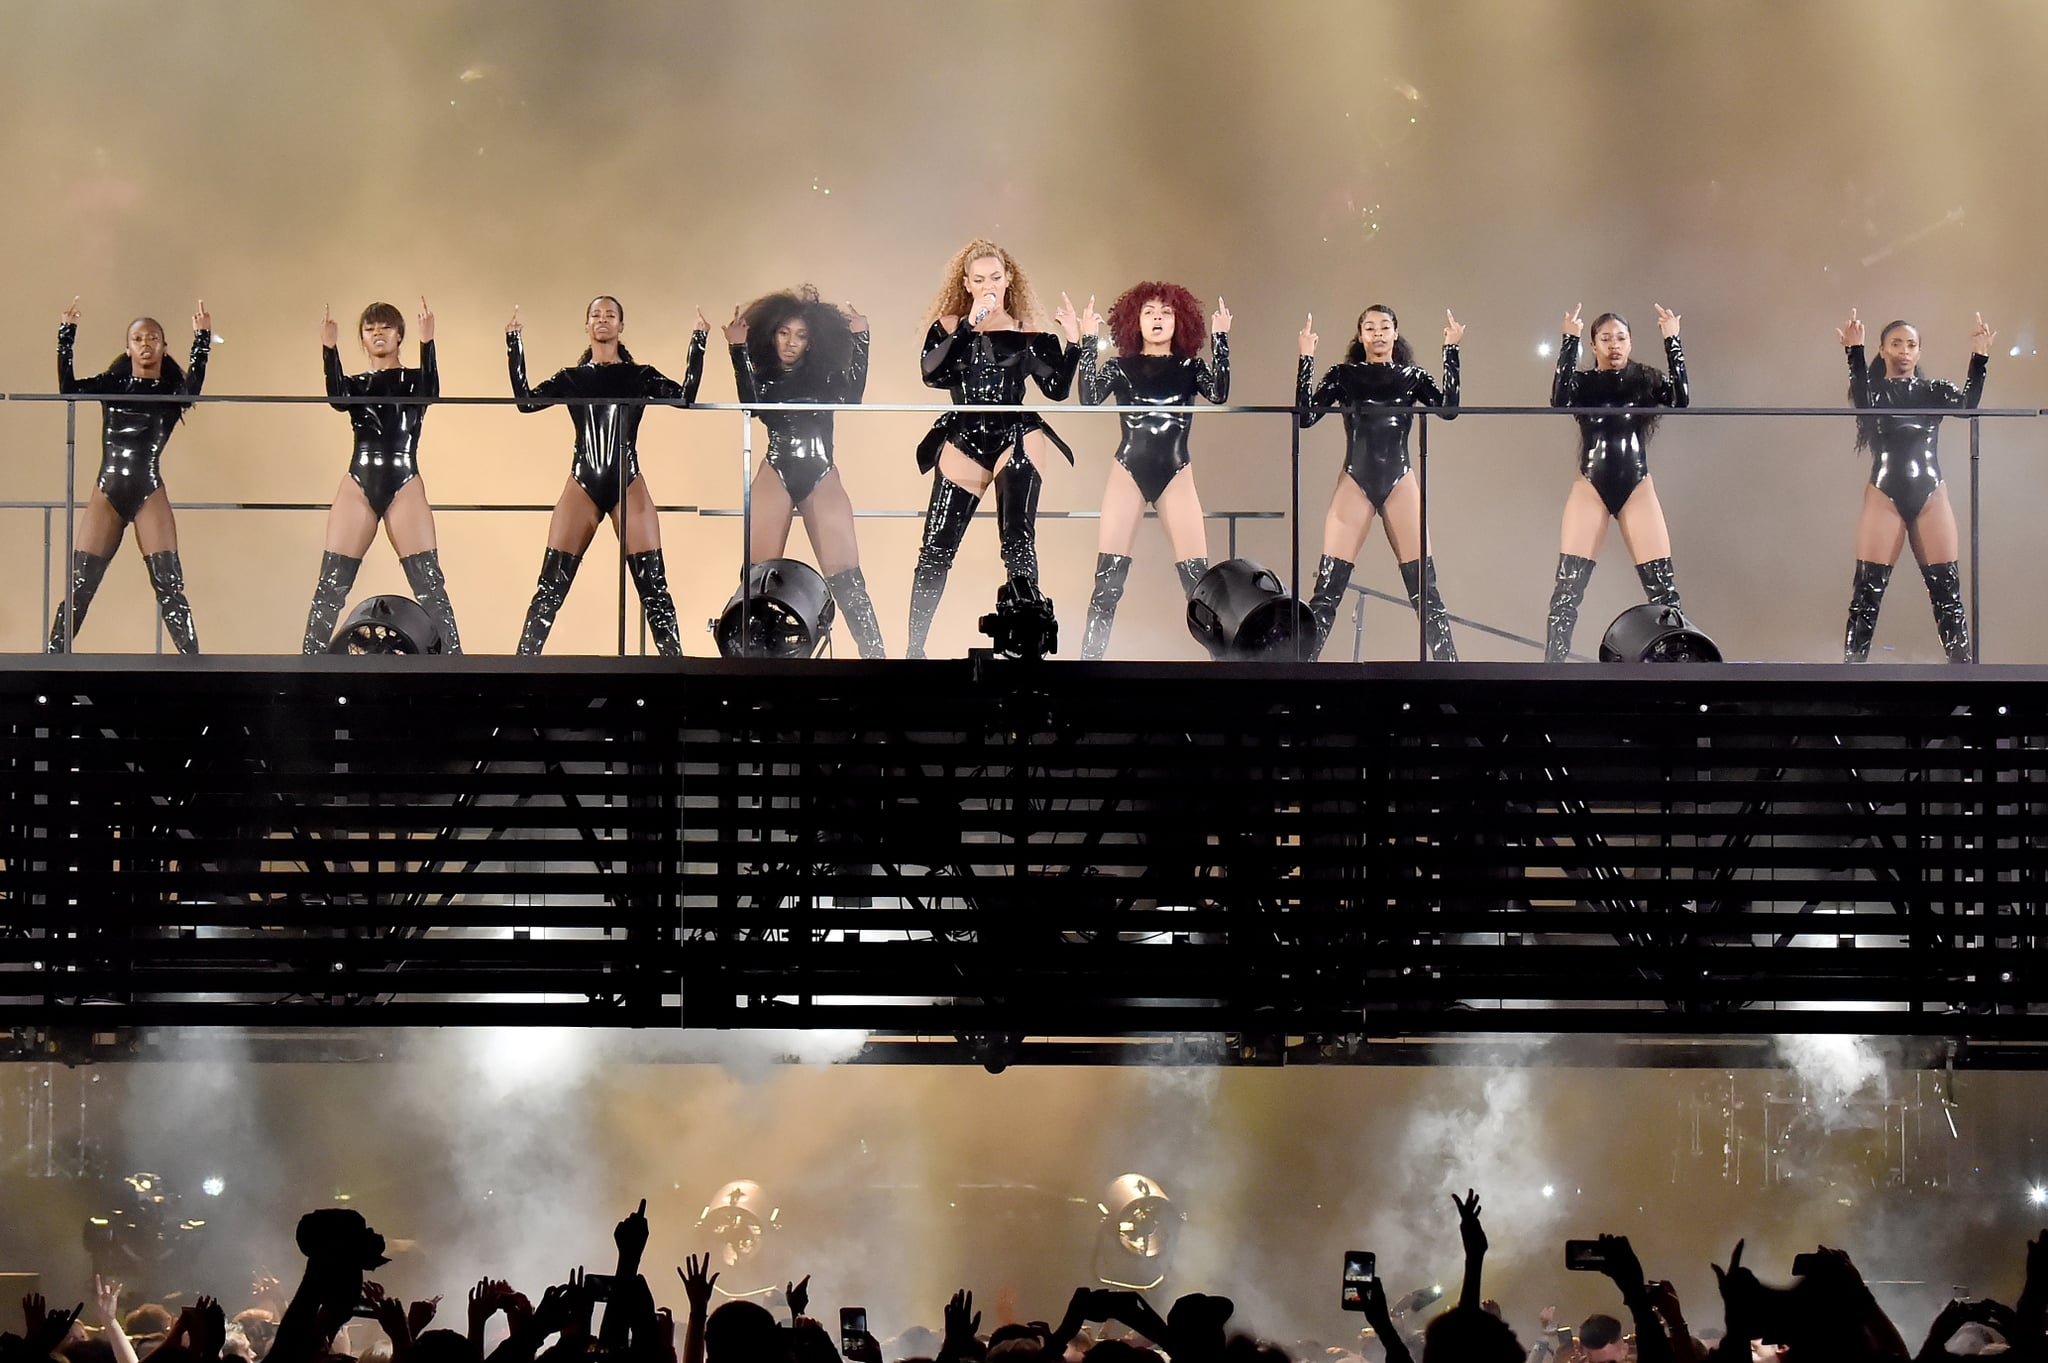 Fashion, Shopping & Style, Beyoncé's Tour Costumes Are So Amazing, No  Wonder She's On the Run